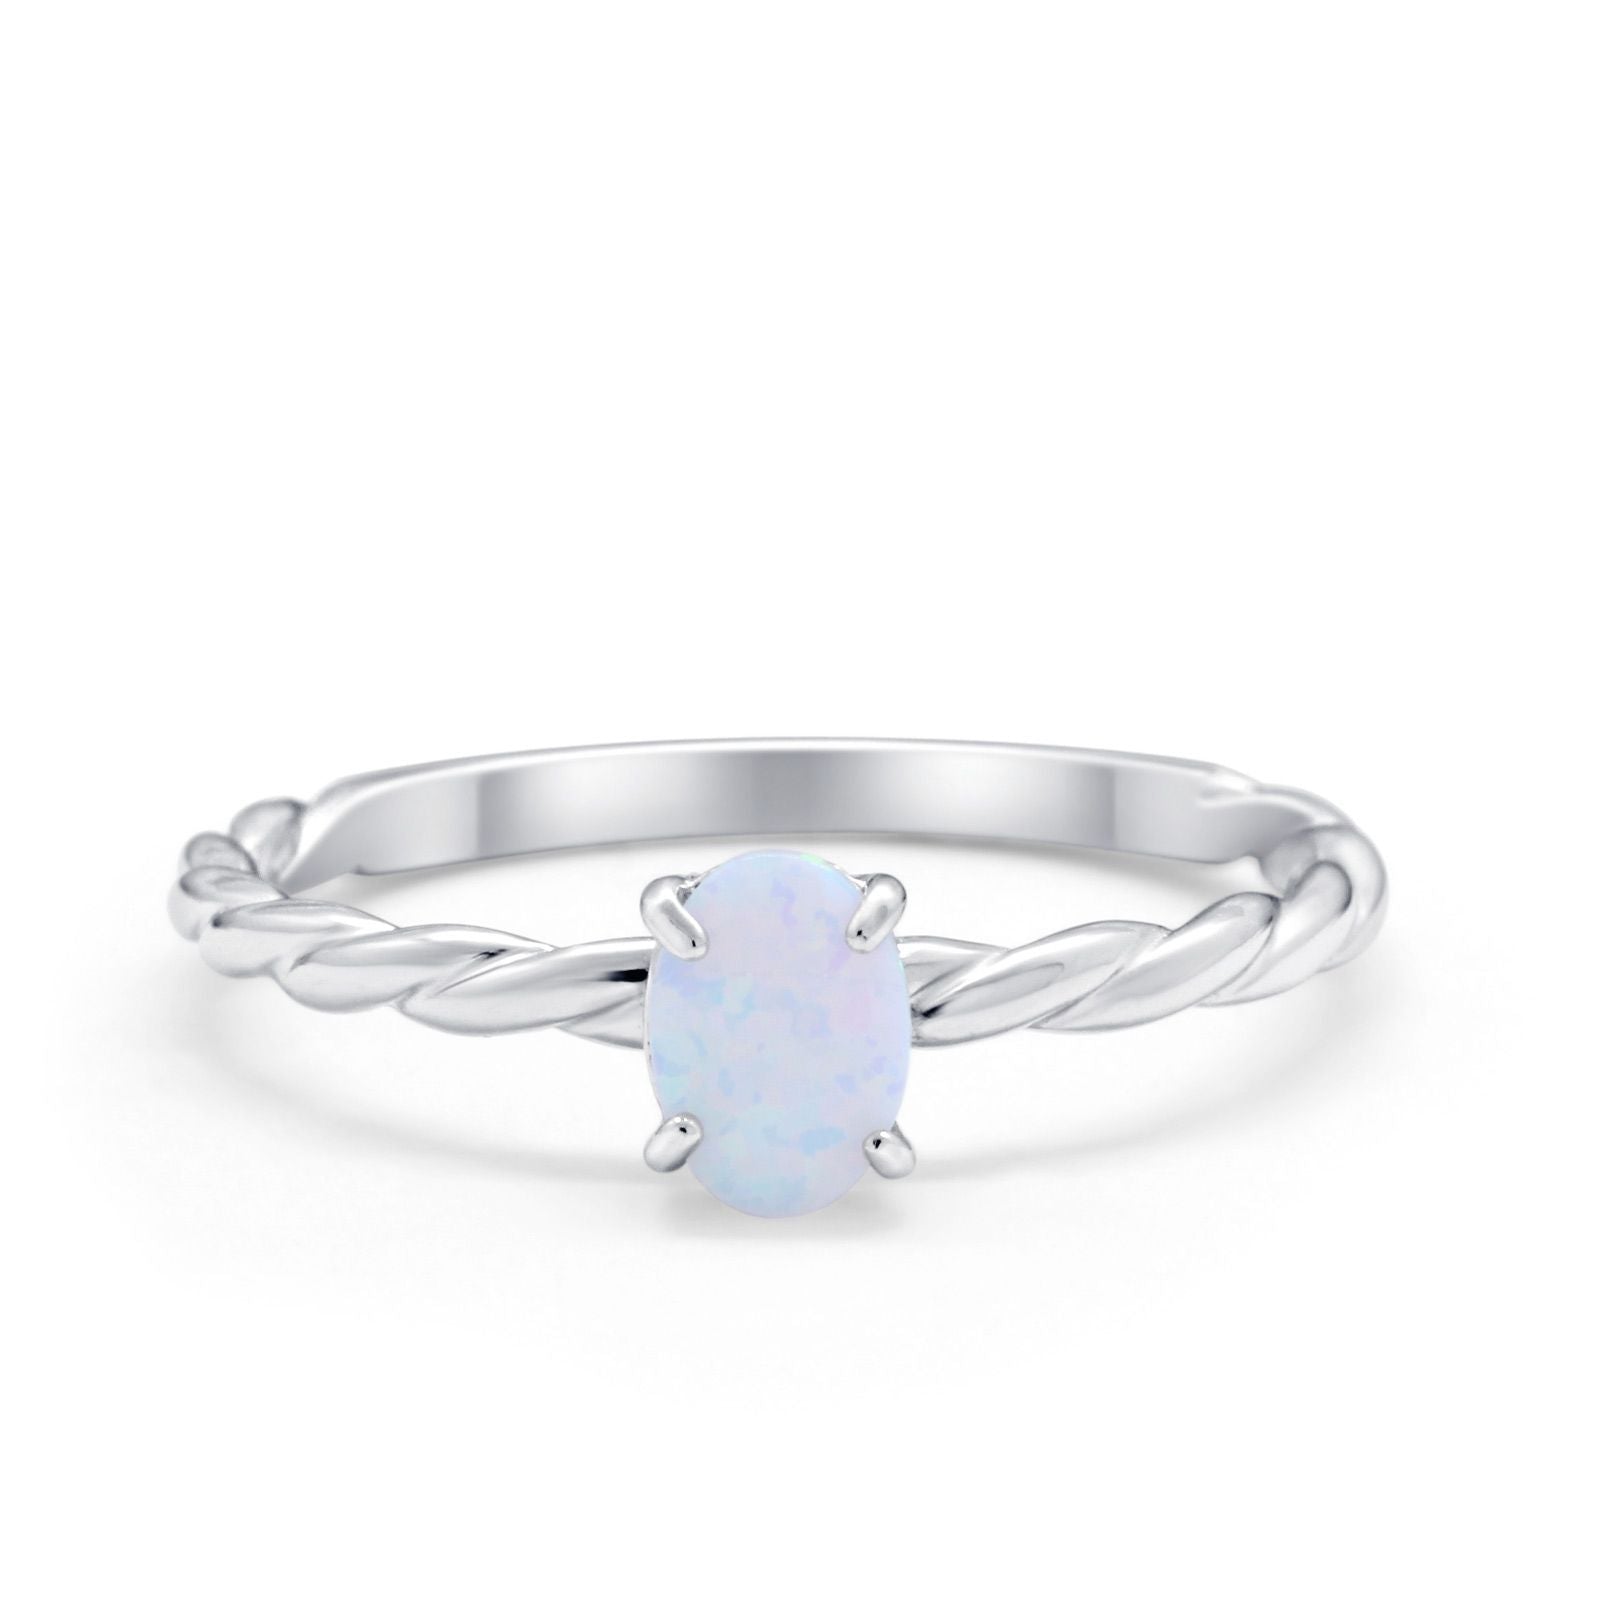 Solitaire Twisted Oval Wedding Ring Lab Created White Opal 925 Sterling Silver